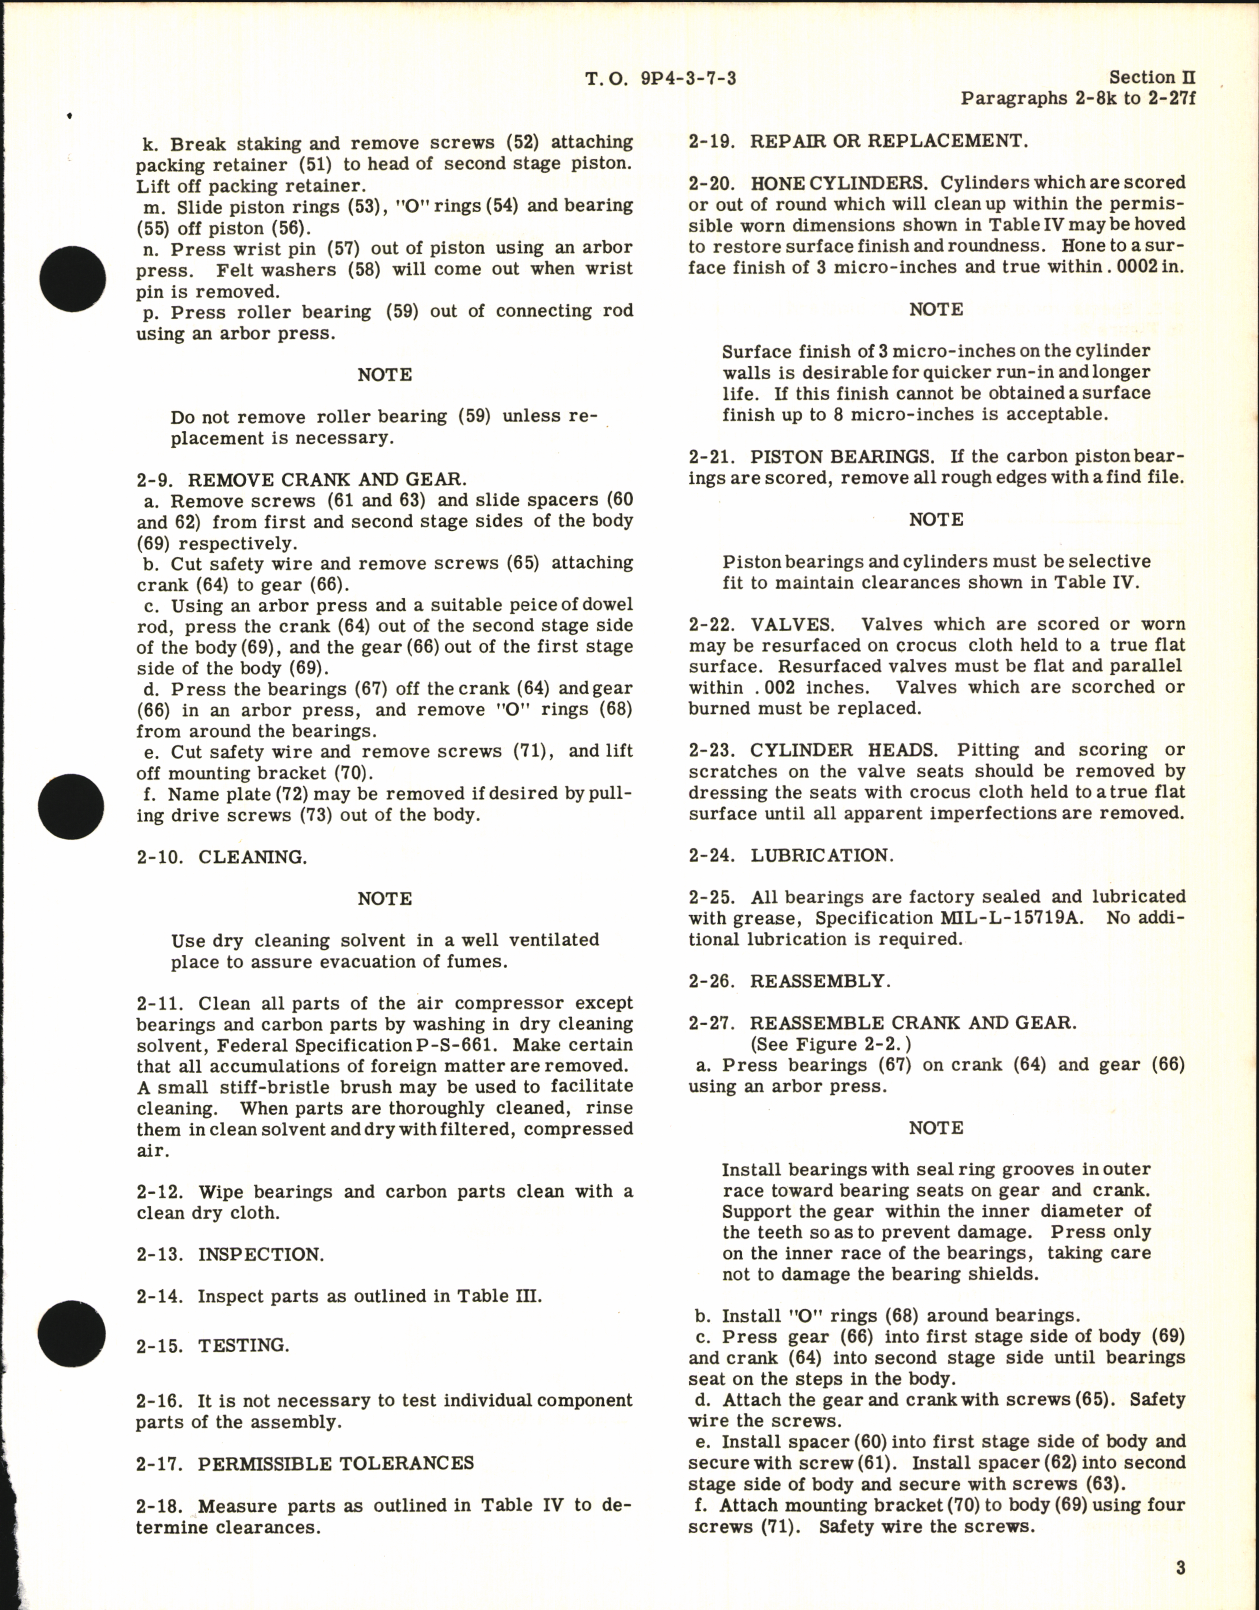 Sample page 7 from AirCorps Library document: Handbook of Instructions for Air Compressor Model 100-627-2